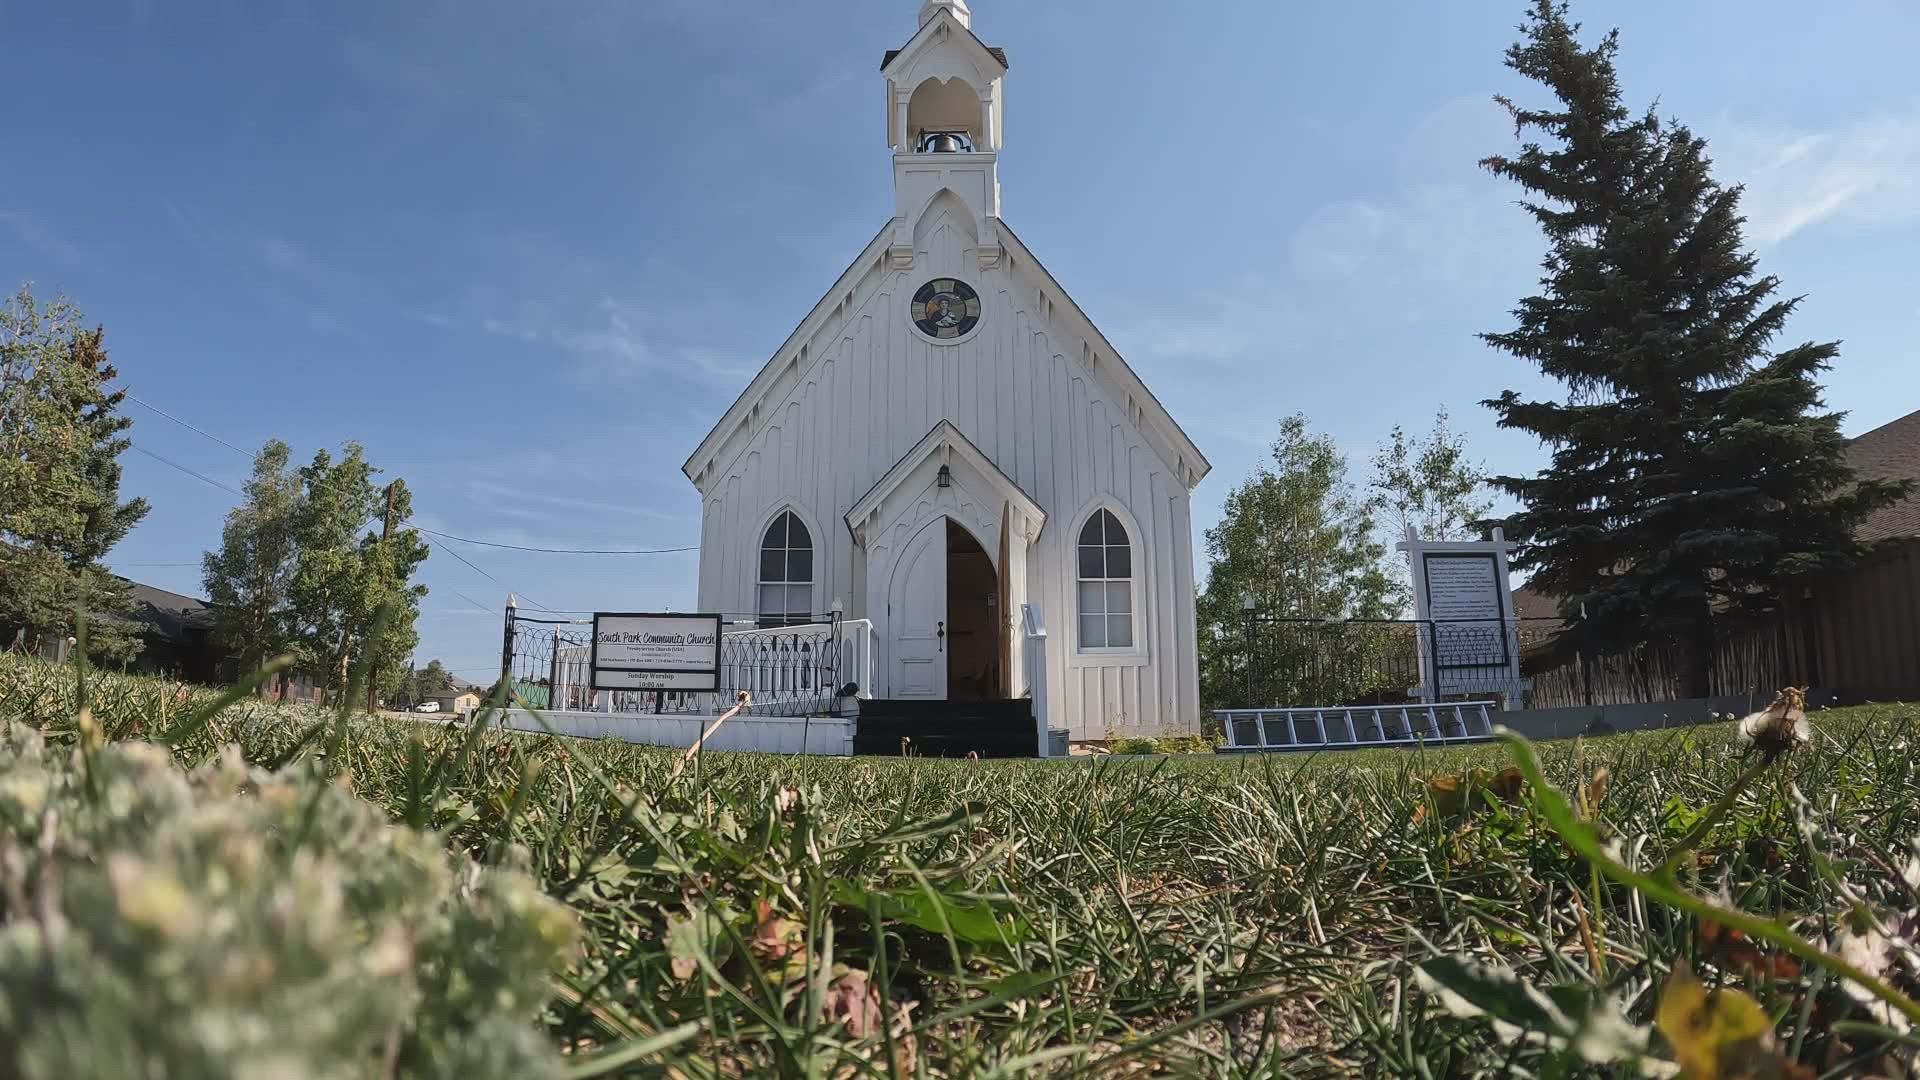 The South Park Community Church has been a big part of the Fairplay community since 1872.